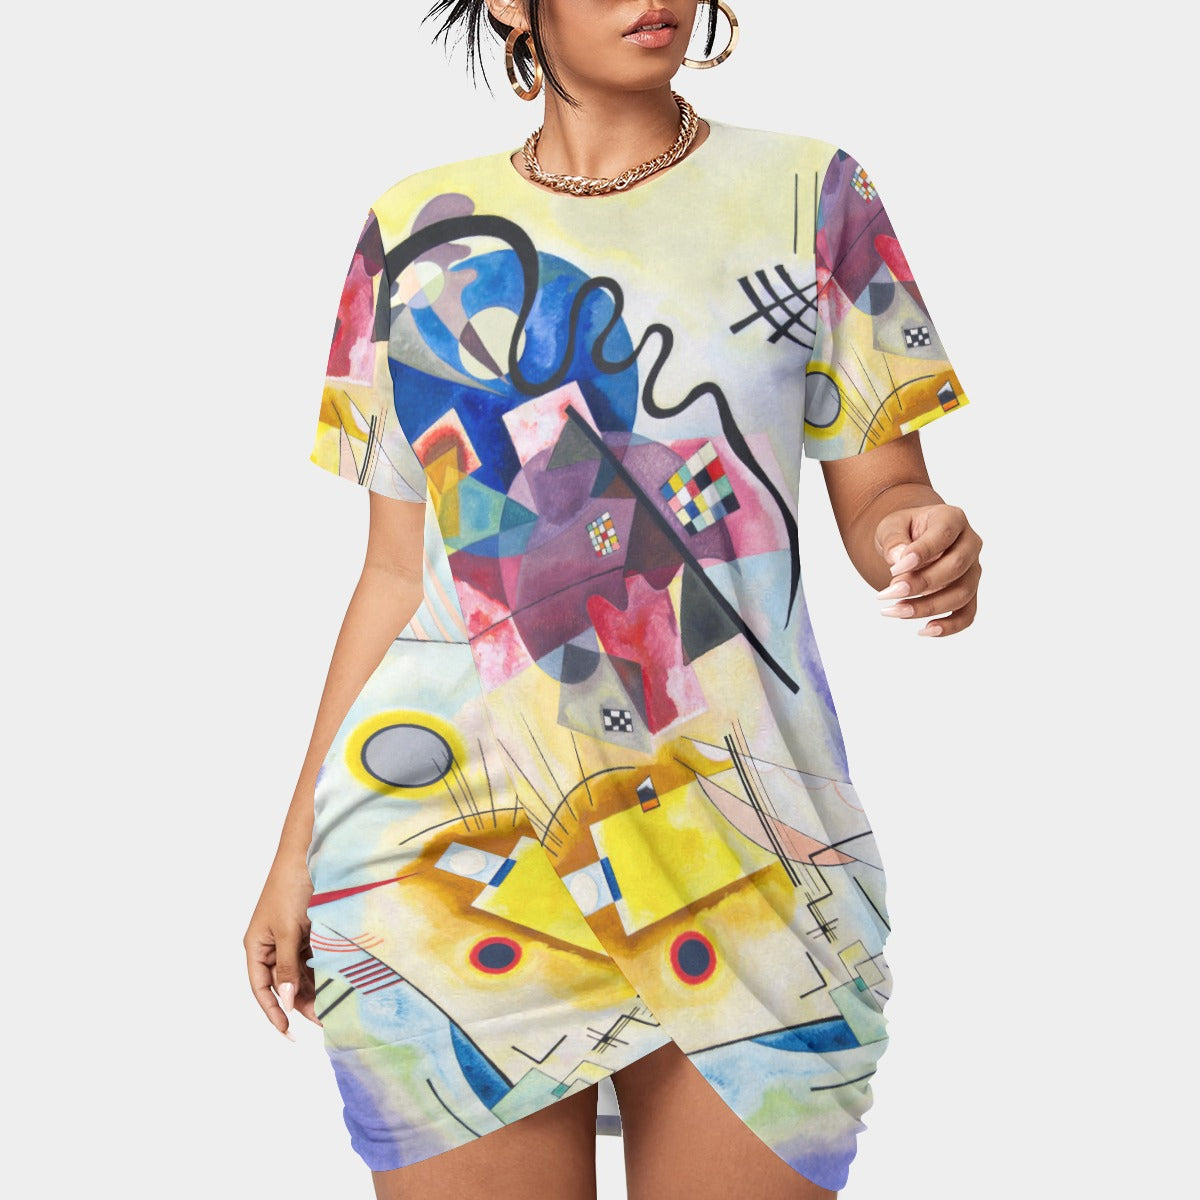 Unique wearable art inspired by Wassily Kandinsky